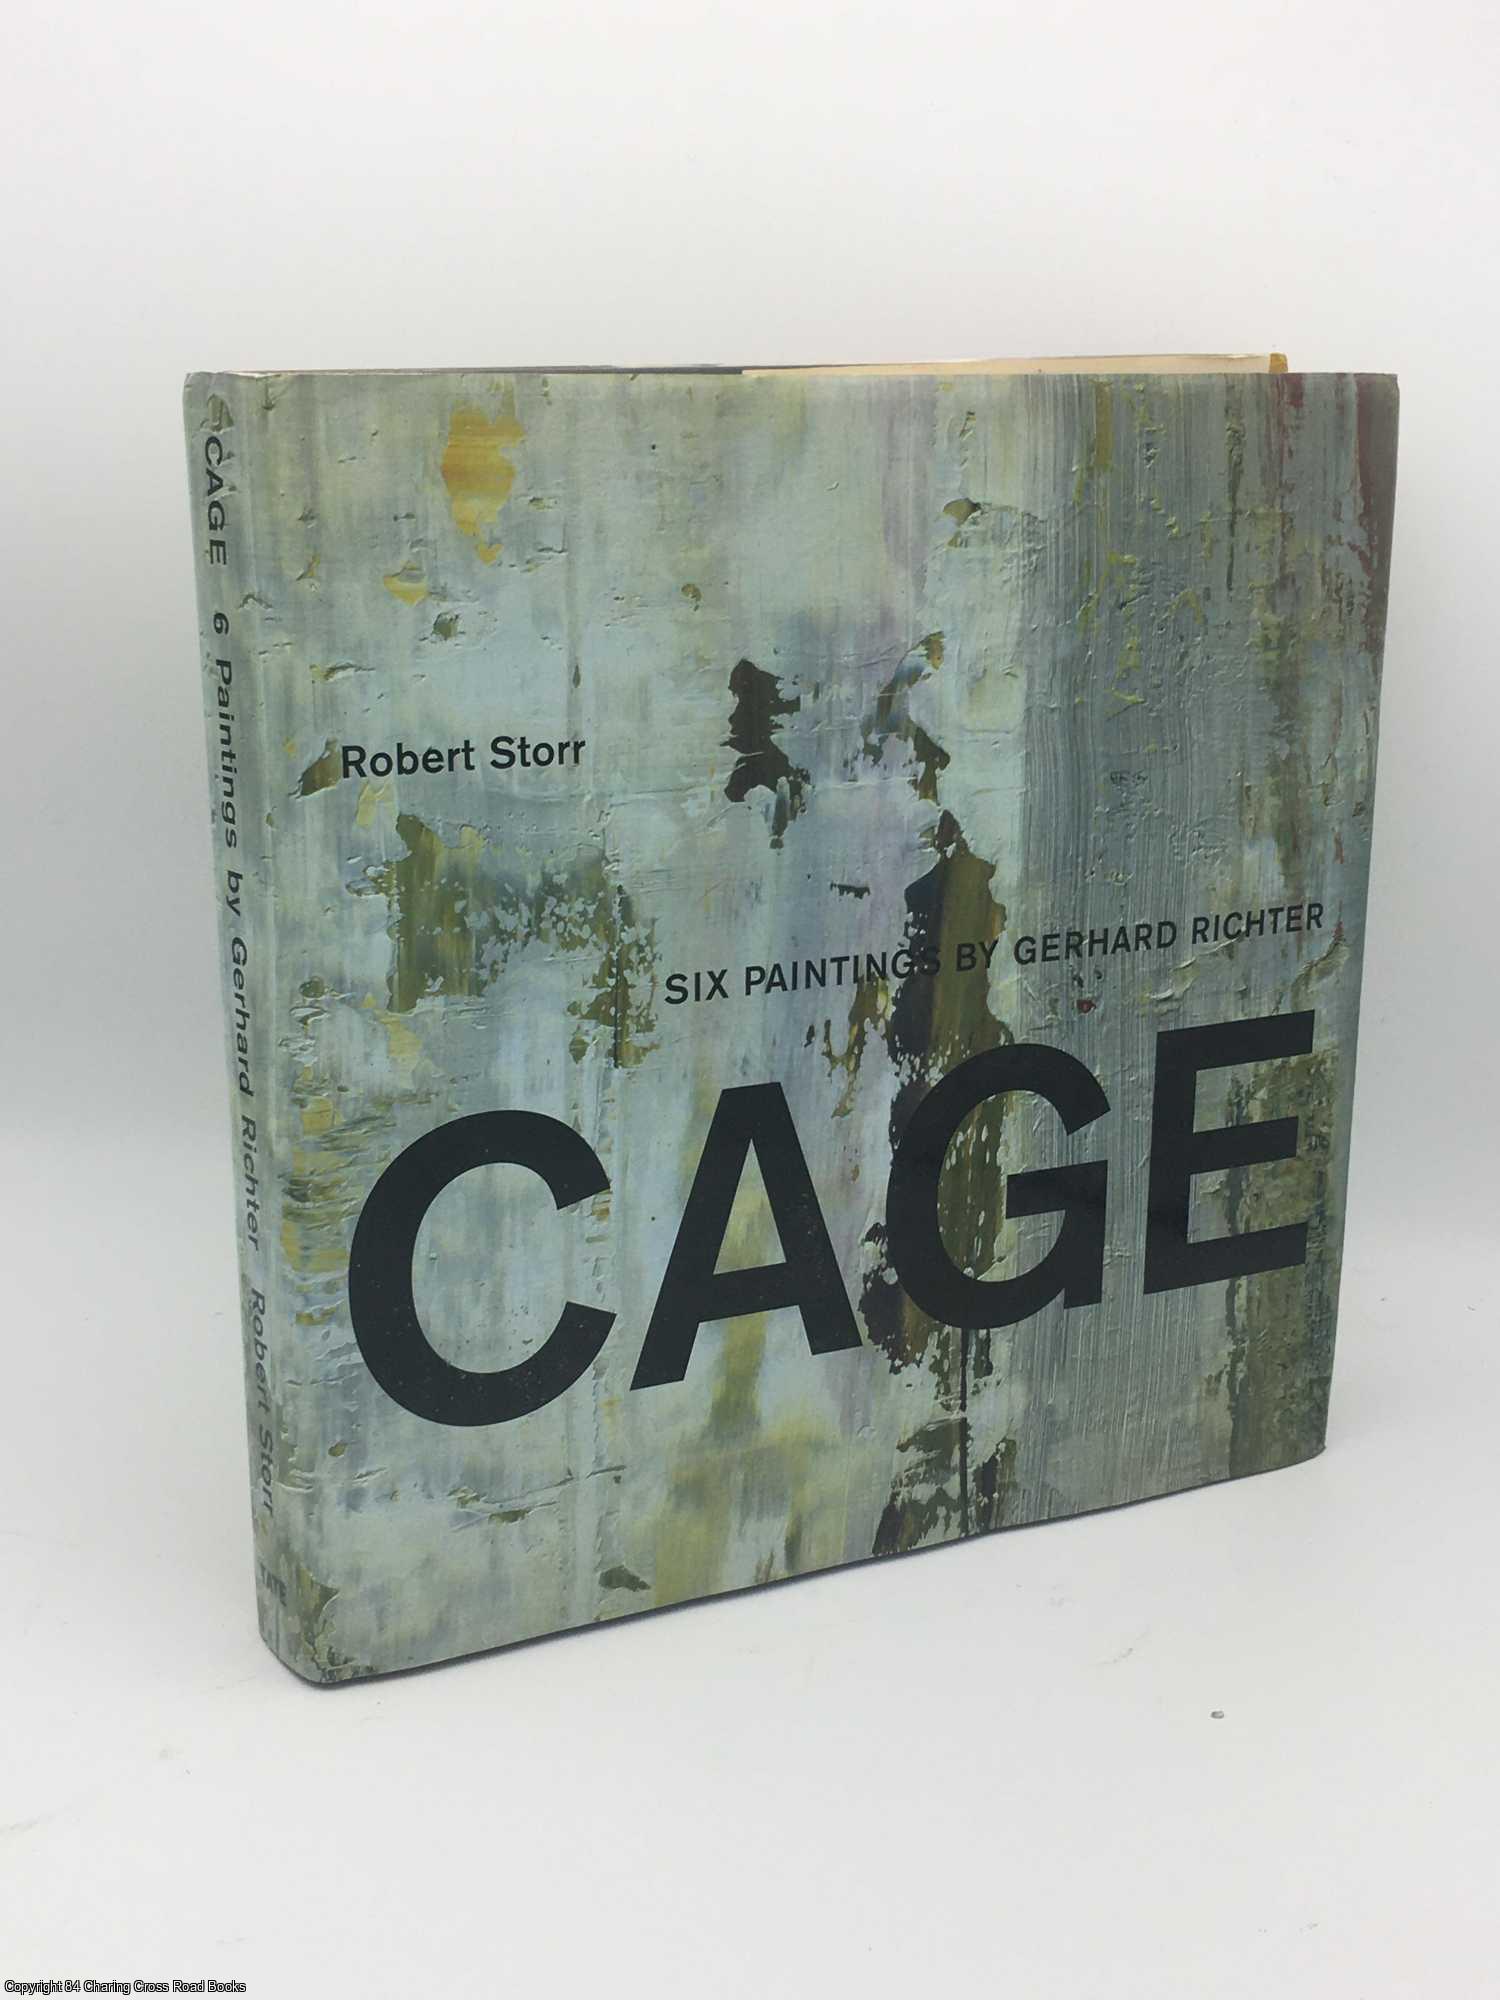 Storr, Robert - Cage: Six Paintings by Gerhard Richter